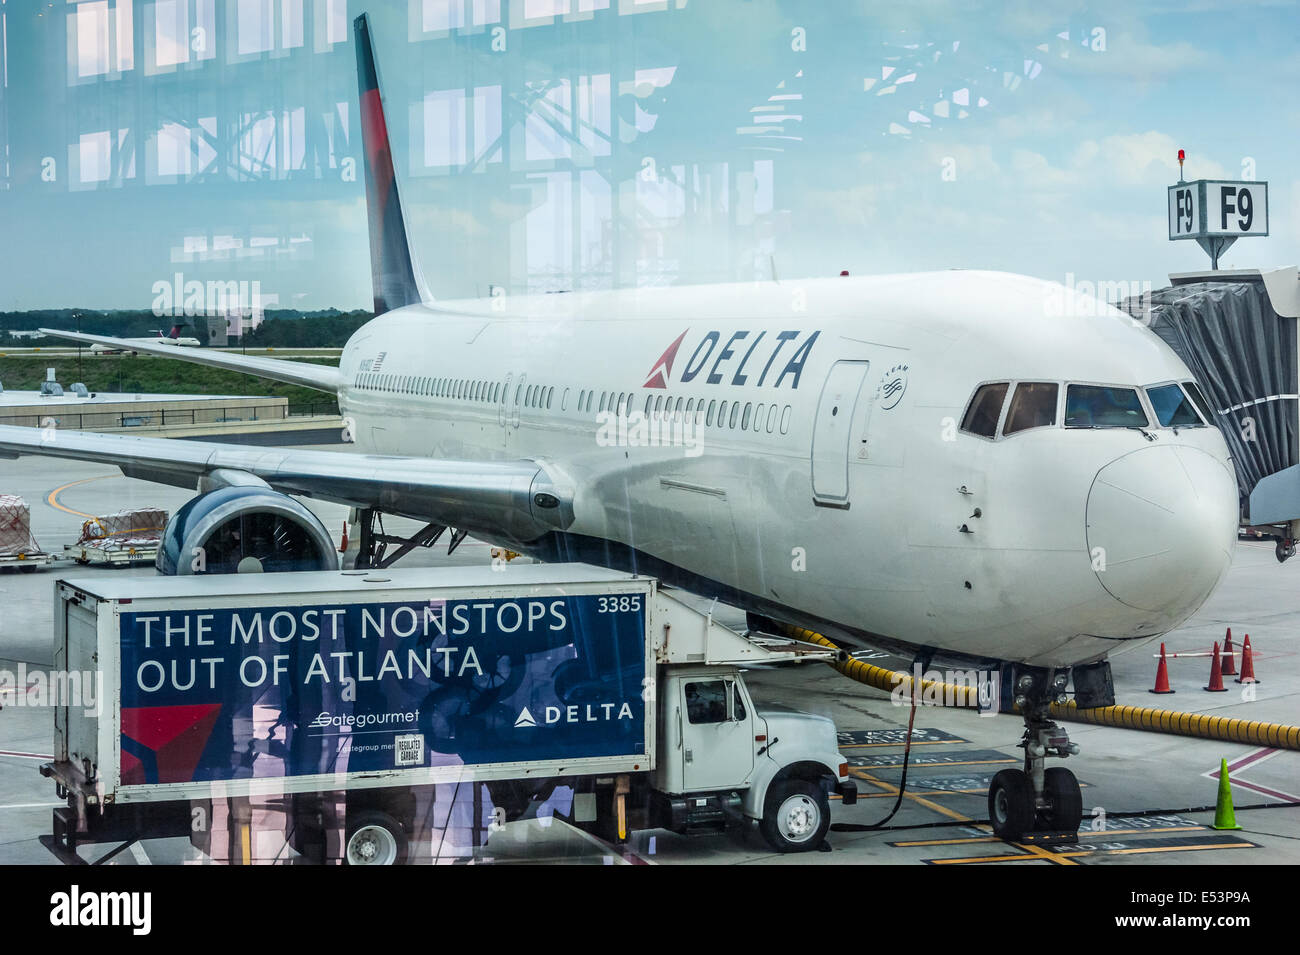 Delta Airlines passenger jet and service truck at Atlanta Stock Photo Alamy